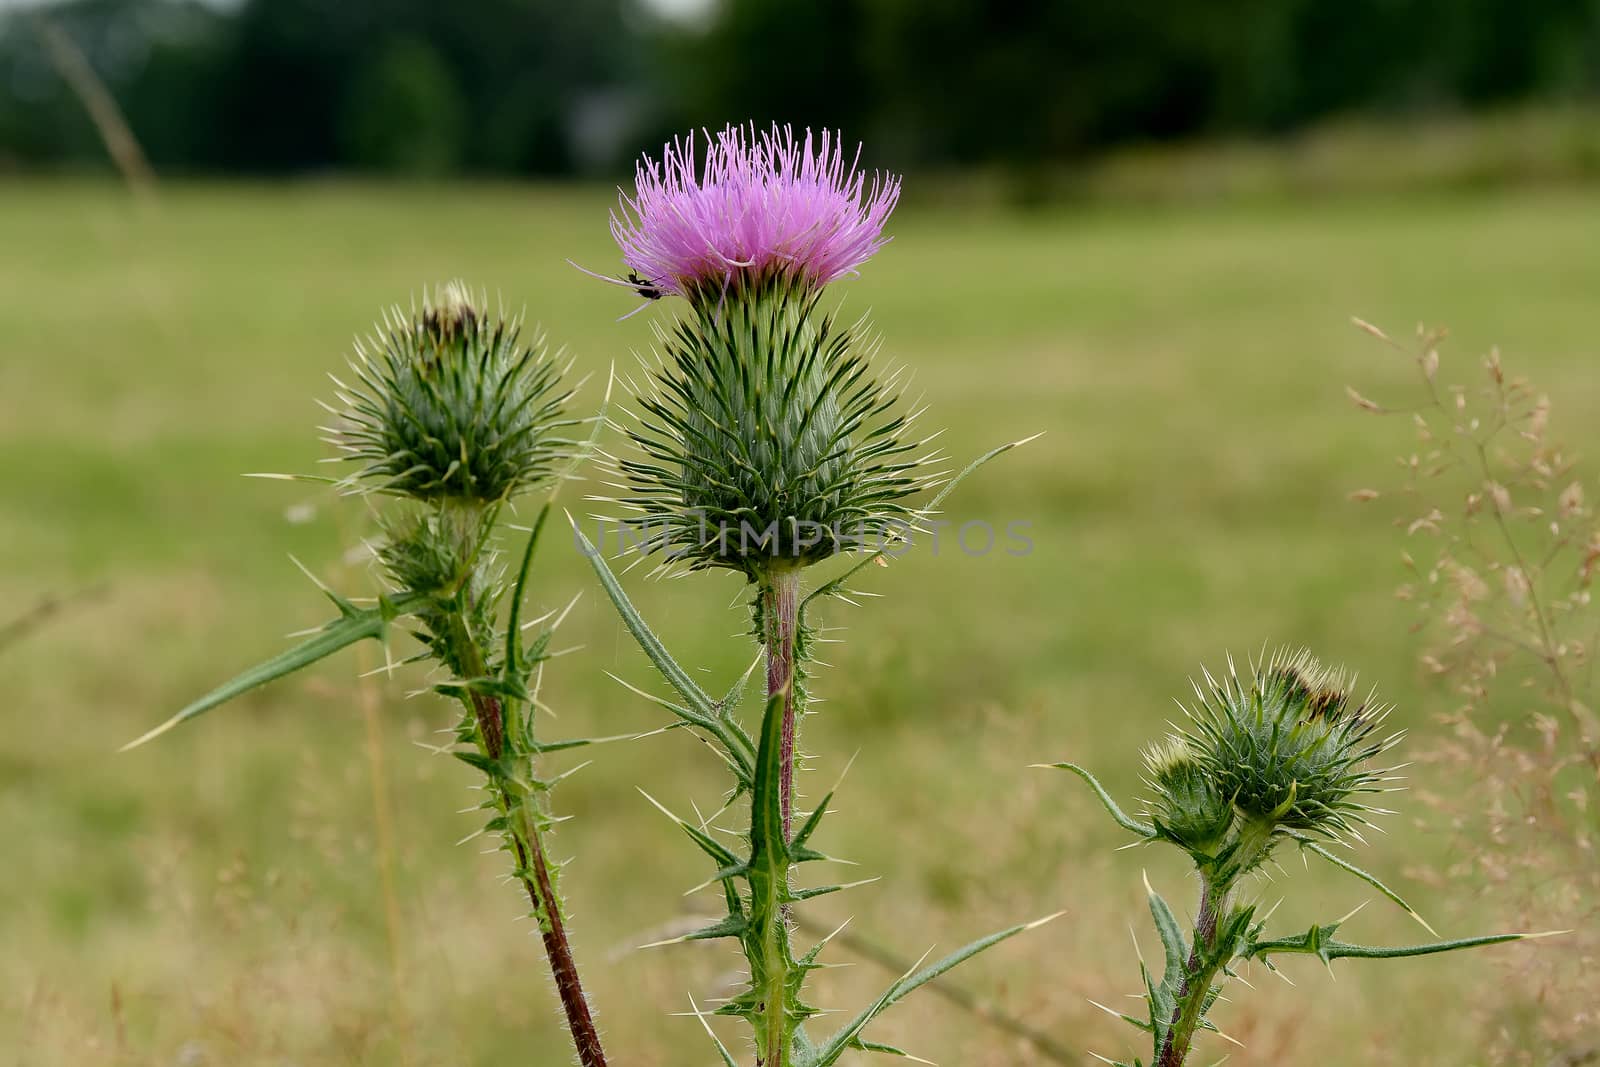 Thistle blossoms with nice green background.